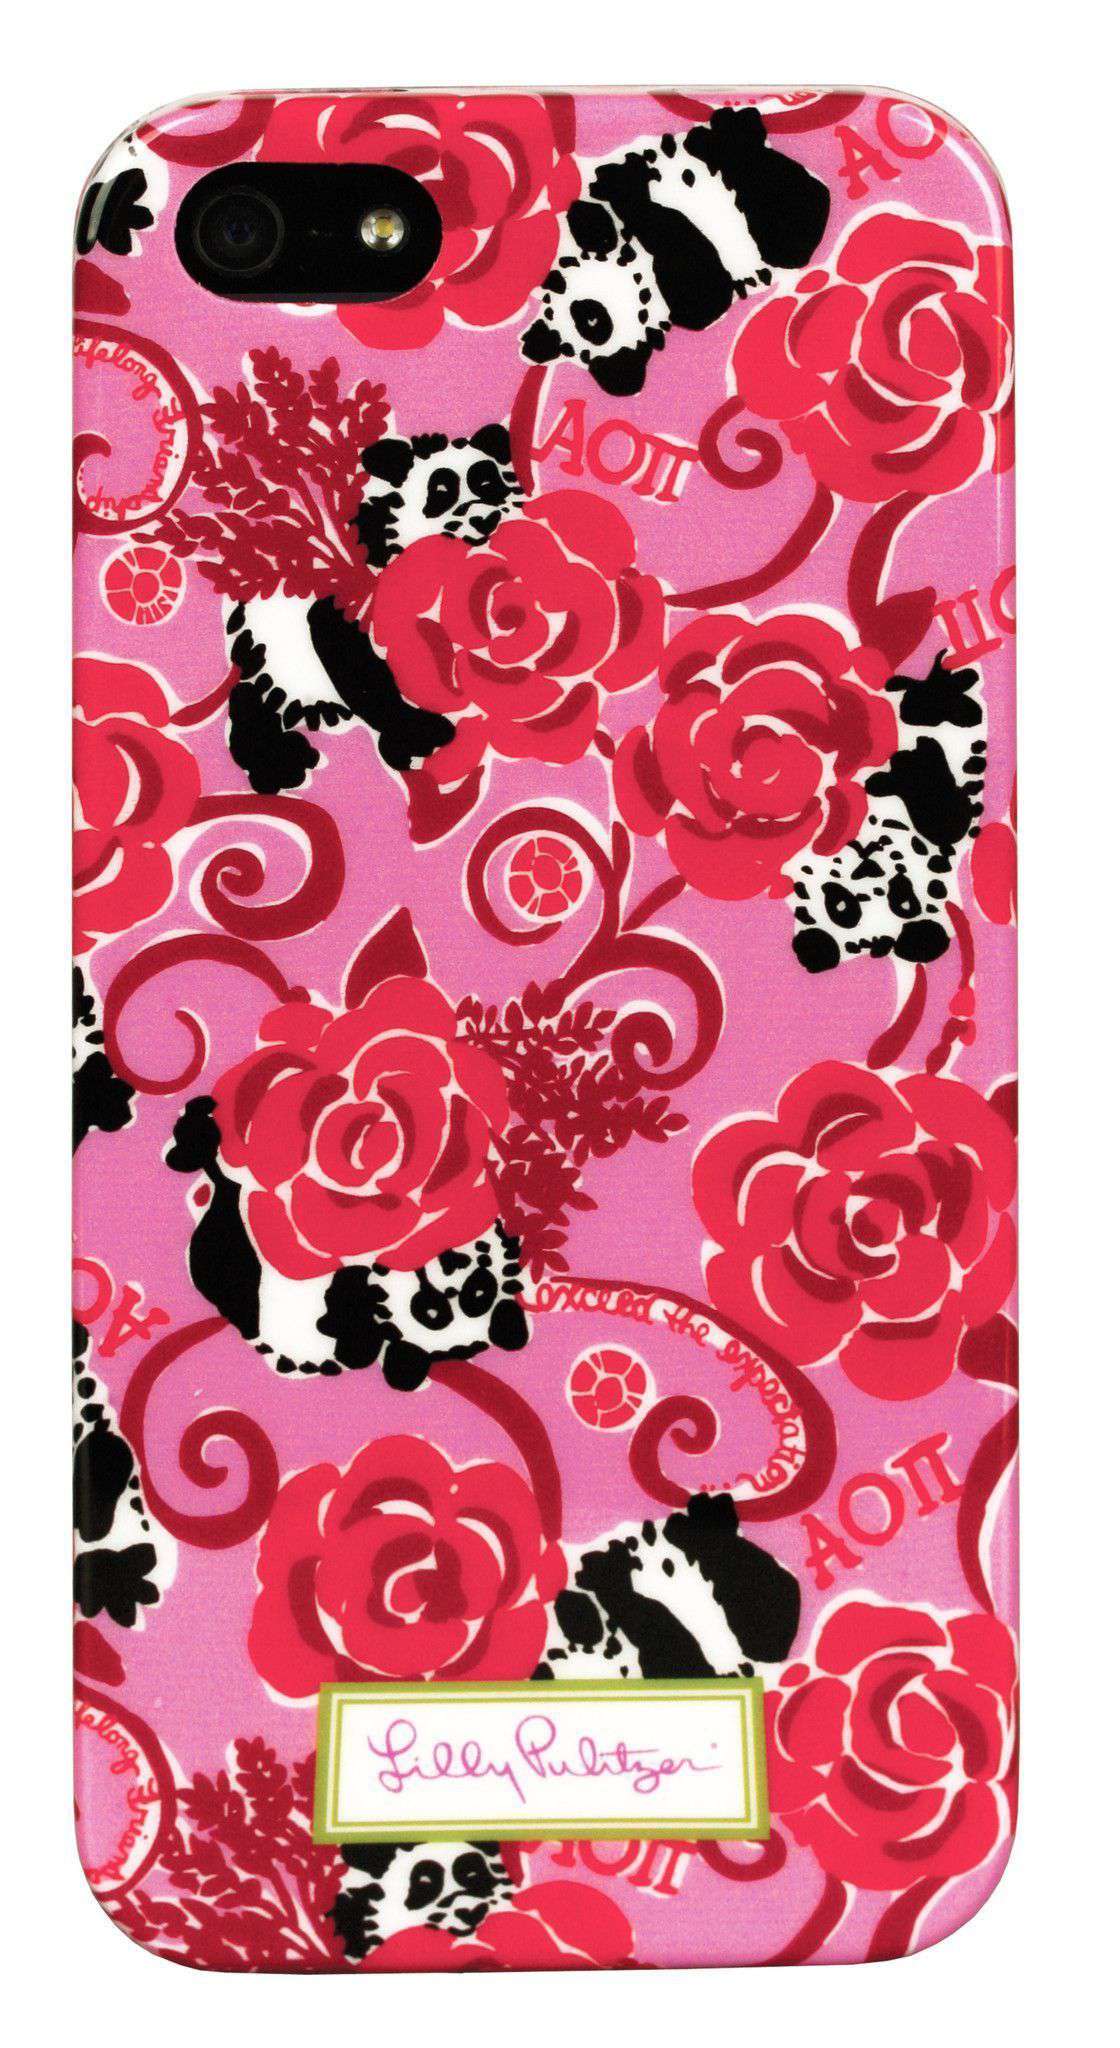 Alpha Omicron Pi iPhone 5/5s Cover by Lilly Pulitzer - Country Club Prep